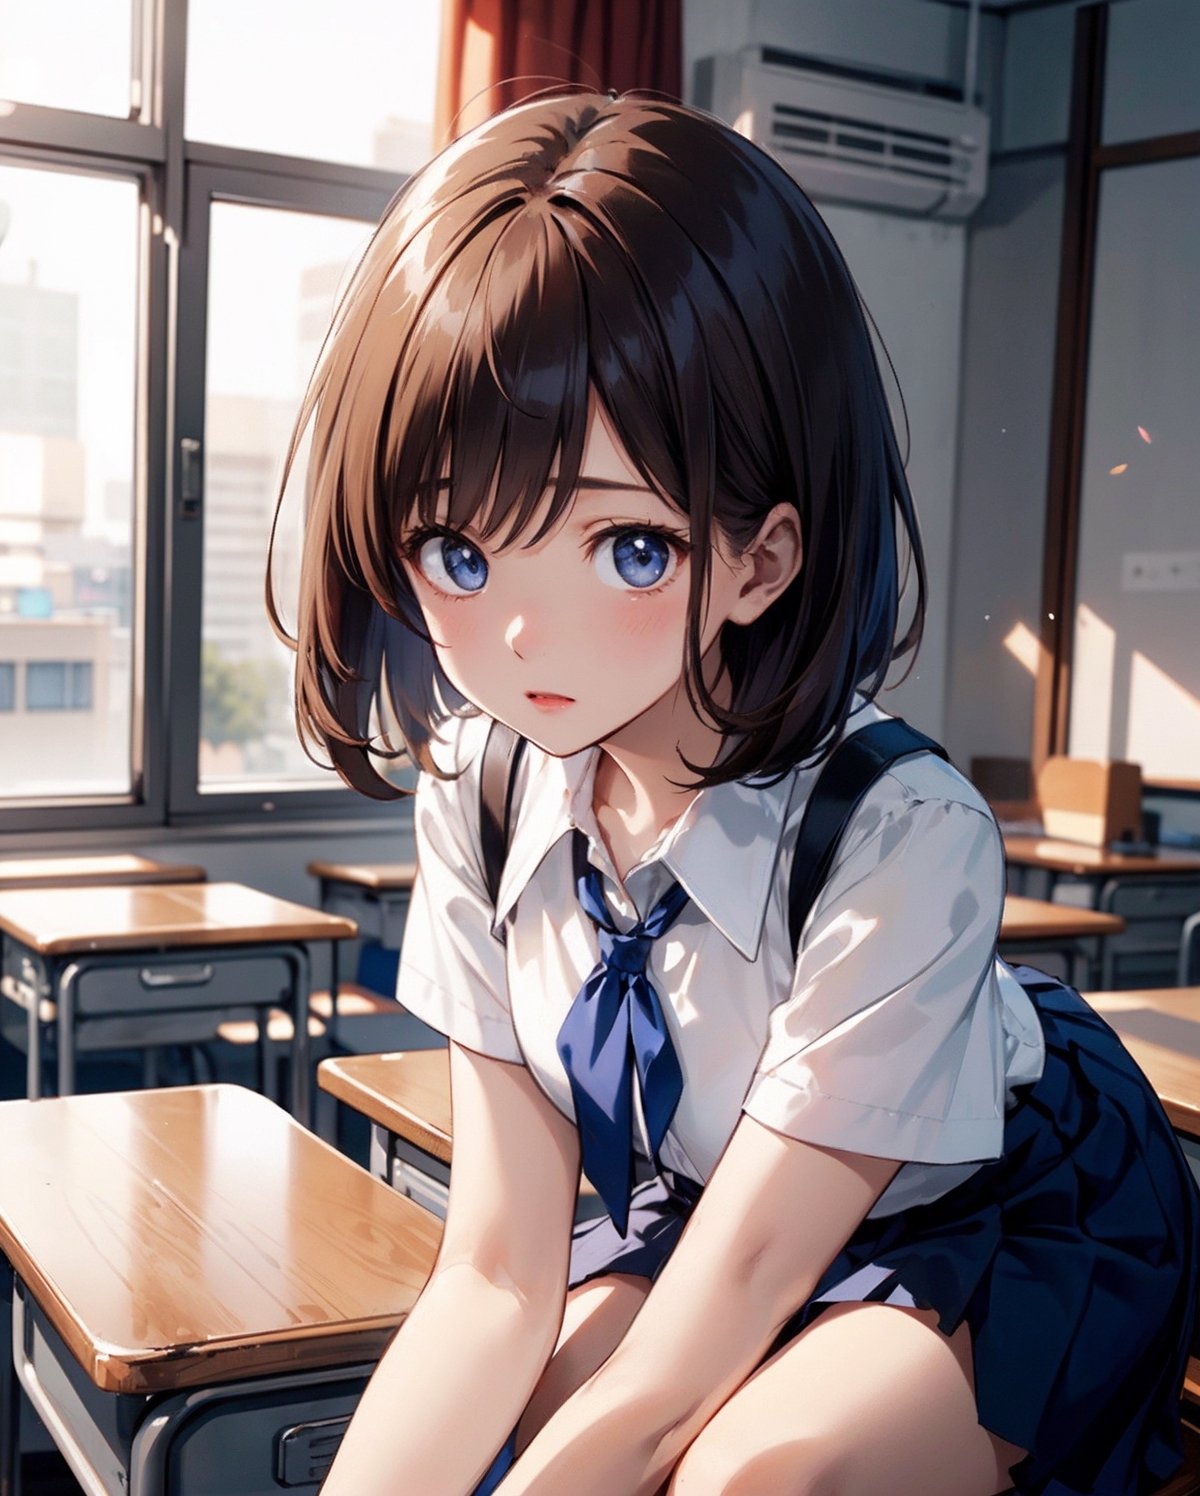 A beautiful Japanese anime girl with short bob-cut brown hair and bangs, wearing a white school blouse with a blue ribbon tie and a pleated navy skirt, sitting in a well-lit classroom with desks and large windows in the background. The girl has large, expressive eyes and a slightly surprised or curious expression. Realistic anime style, high detail, soft lighting, natural sunlight
,anime